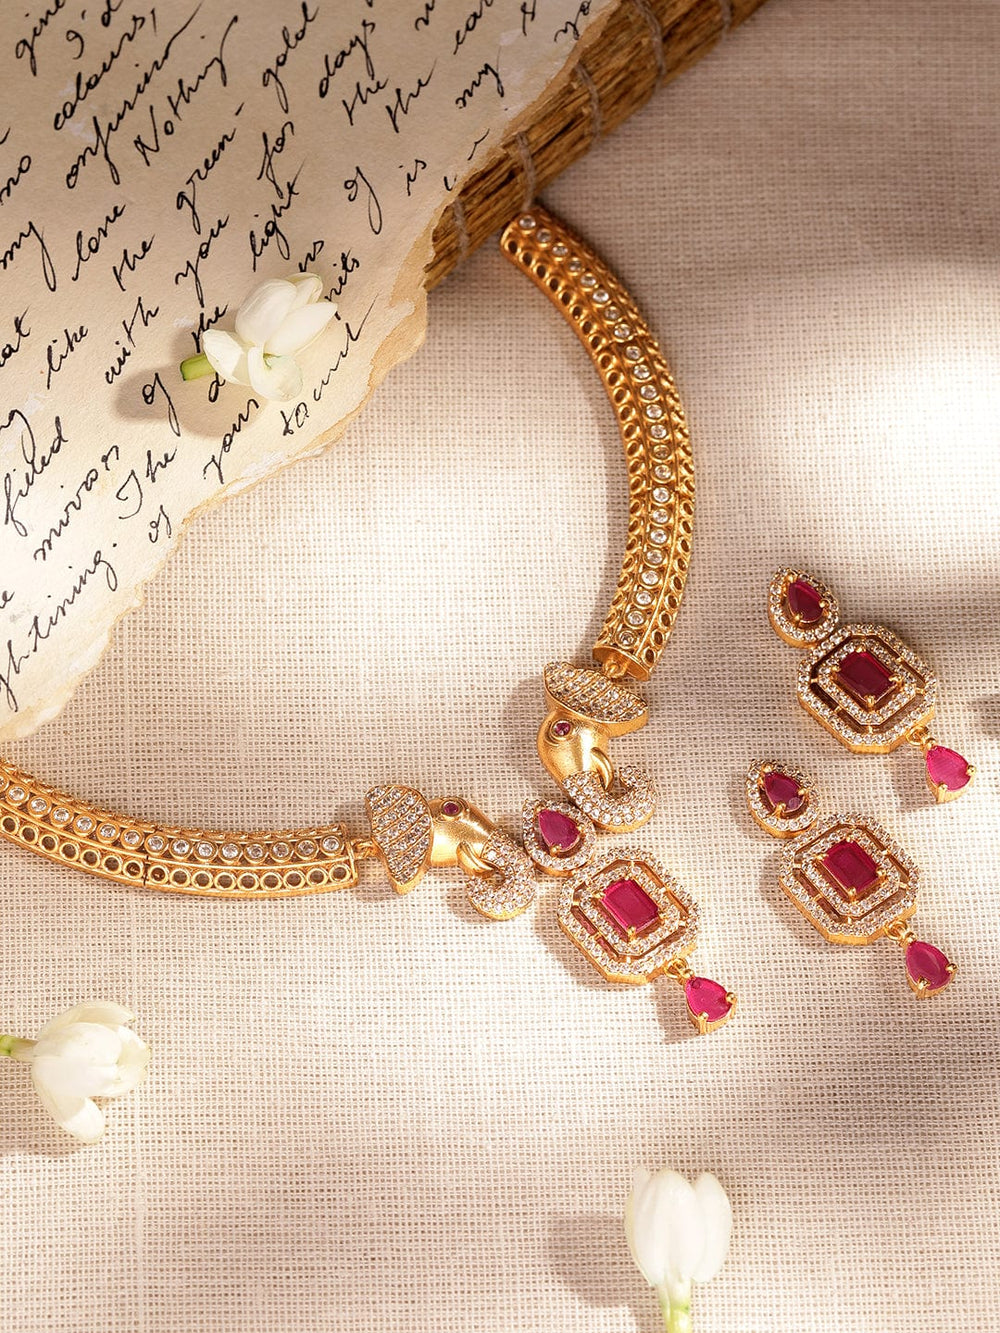 Rubans Radiant Gold-Plated AD & Pink Stone Necklace Set Jewellery Sets